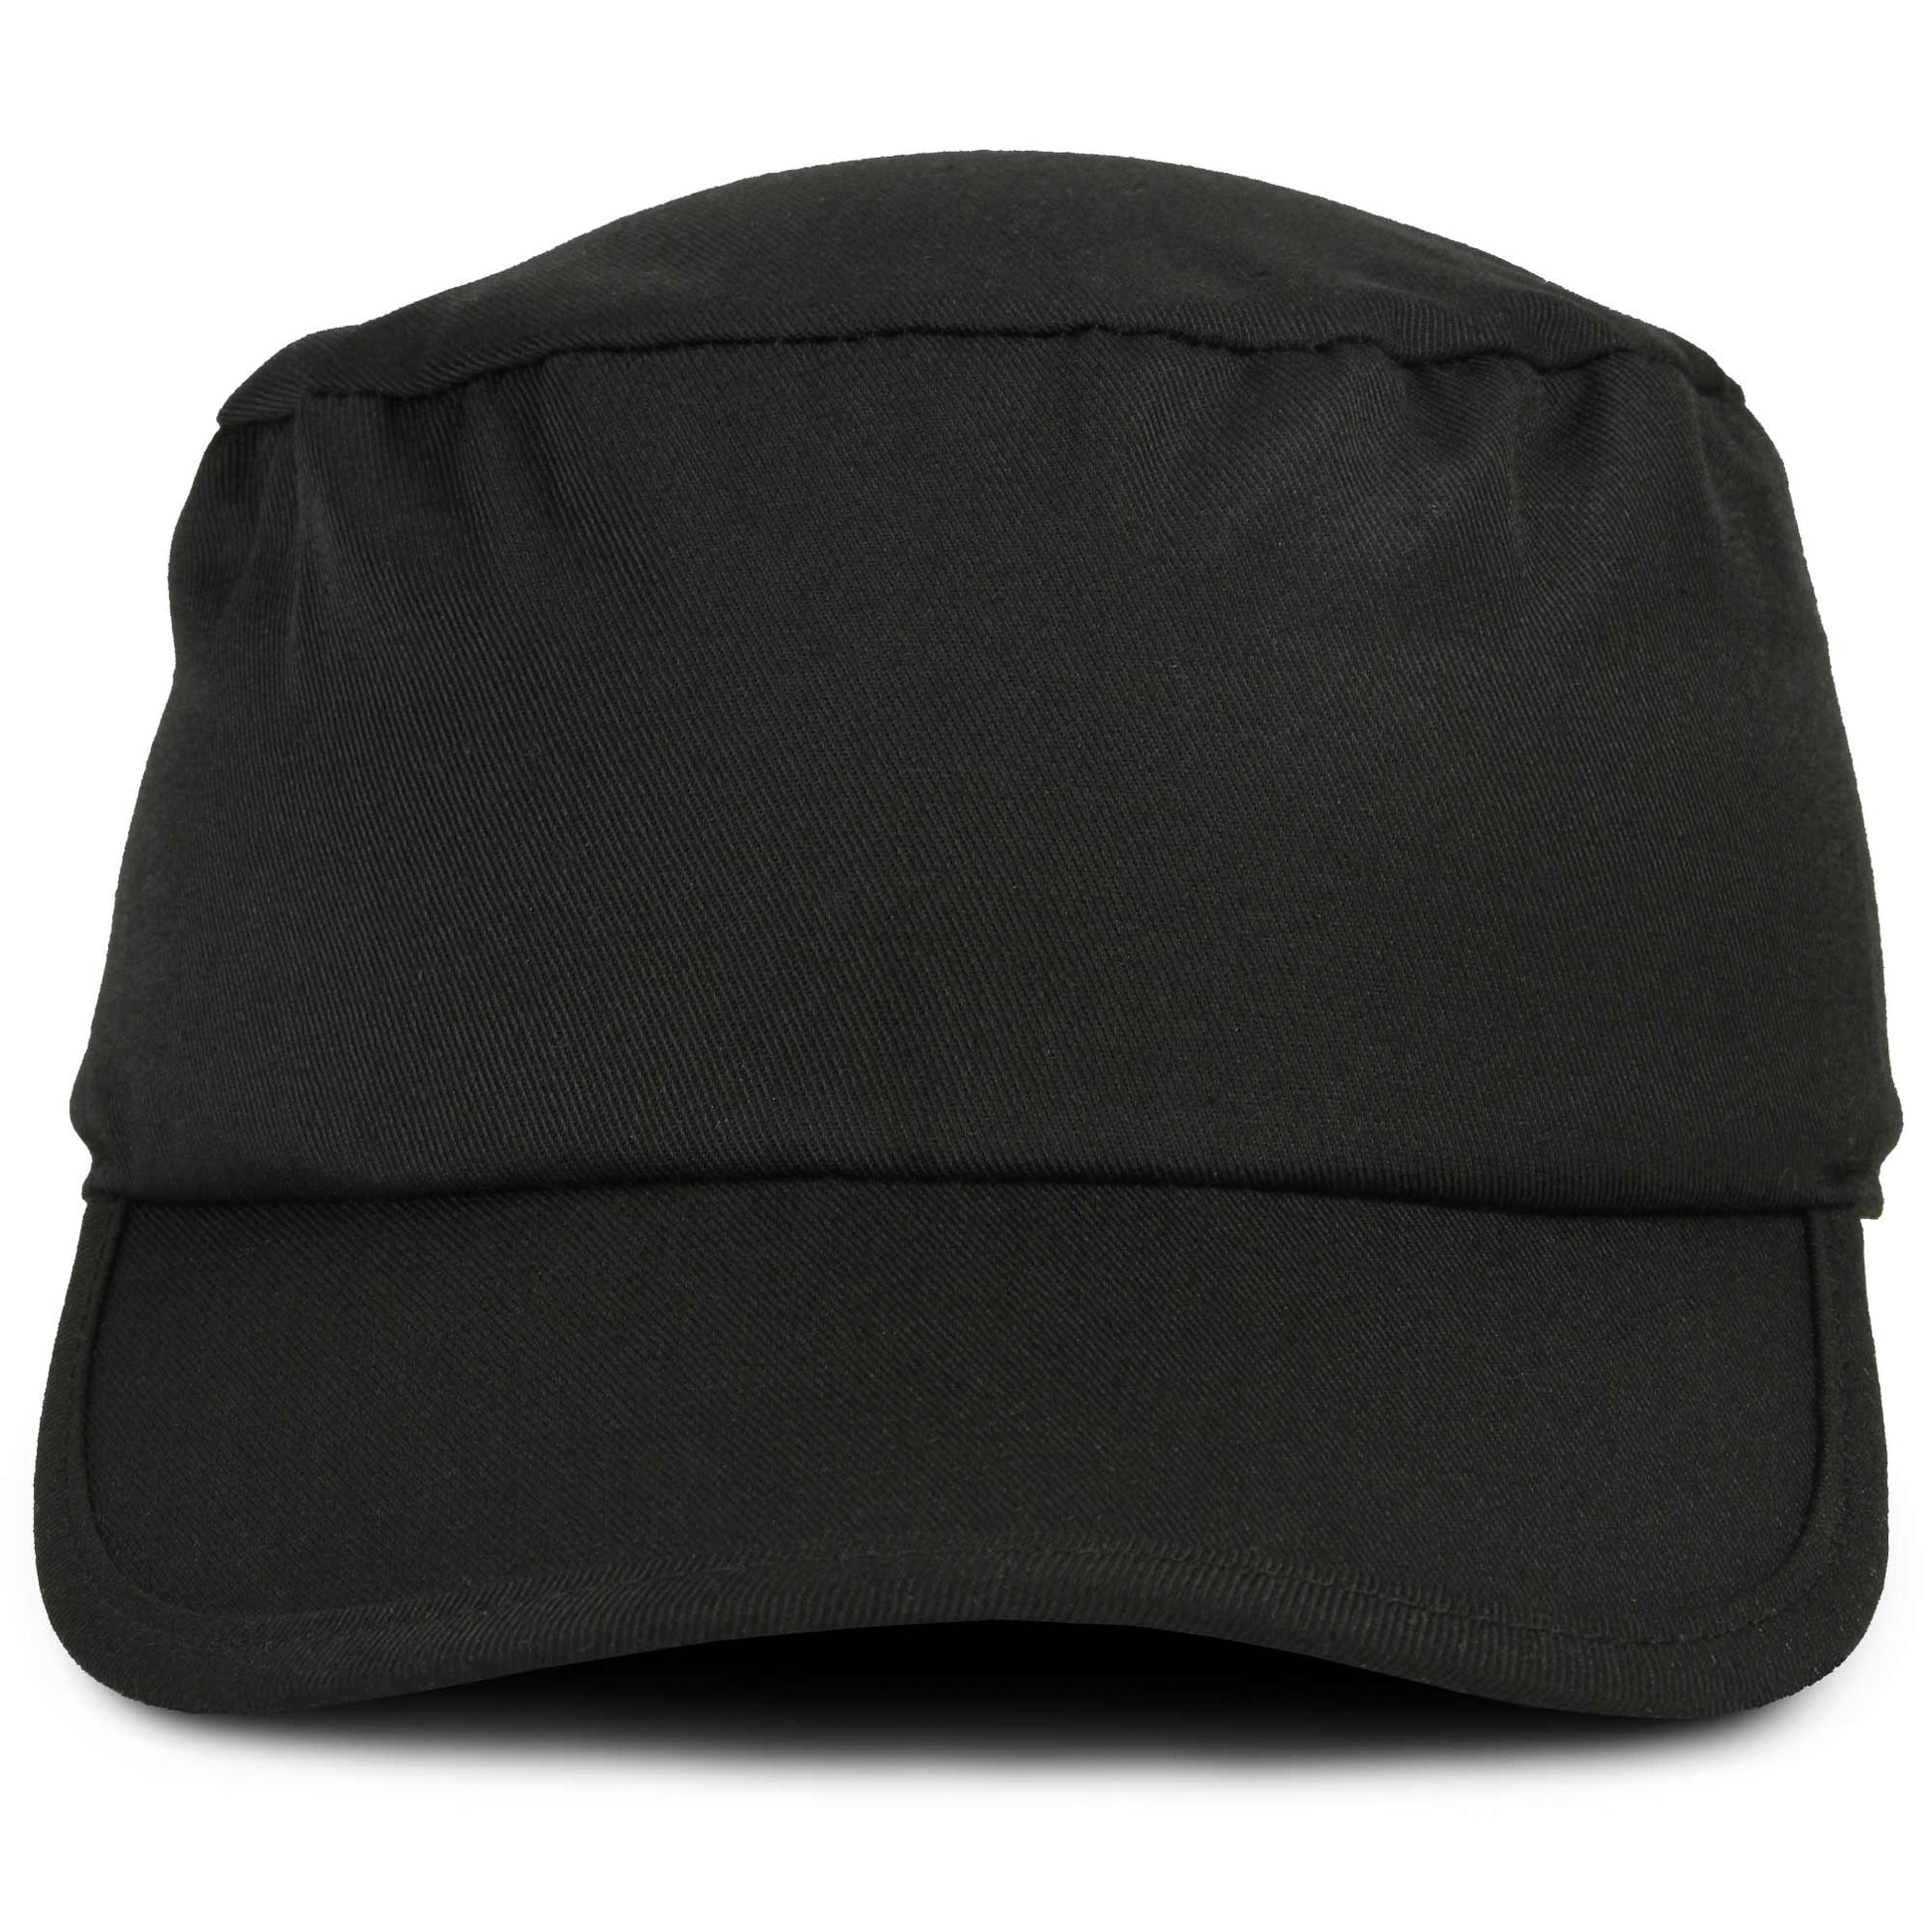 Dalix Solid Blank Trucker Hats Caps (2 for 1 Deal) Black